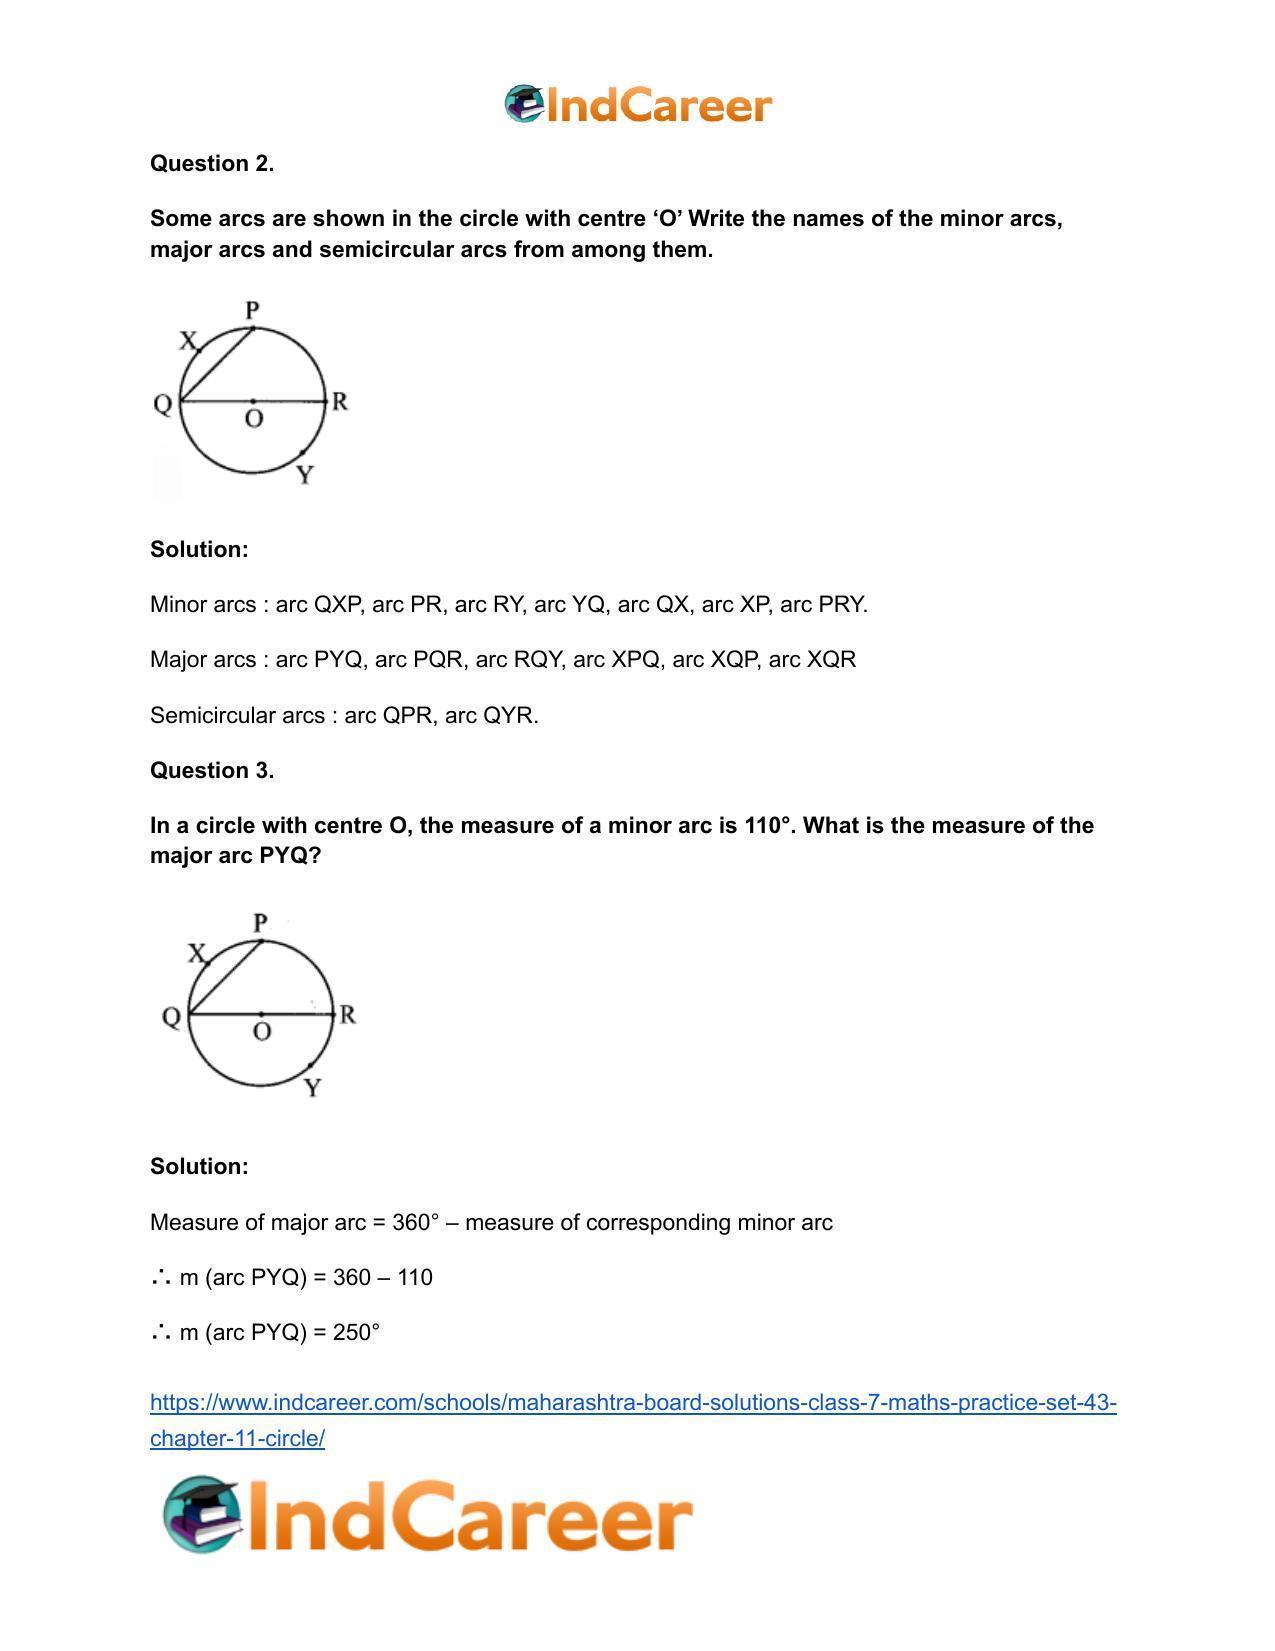 Maharashtra Board Solutions Class 7-Maths (Practice Set 43): Chapter 11- Circle - Page 3